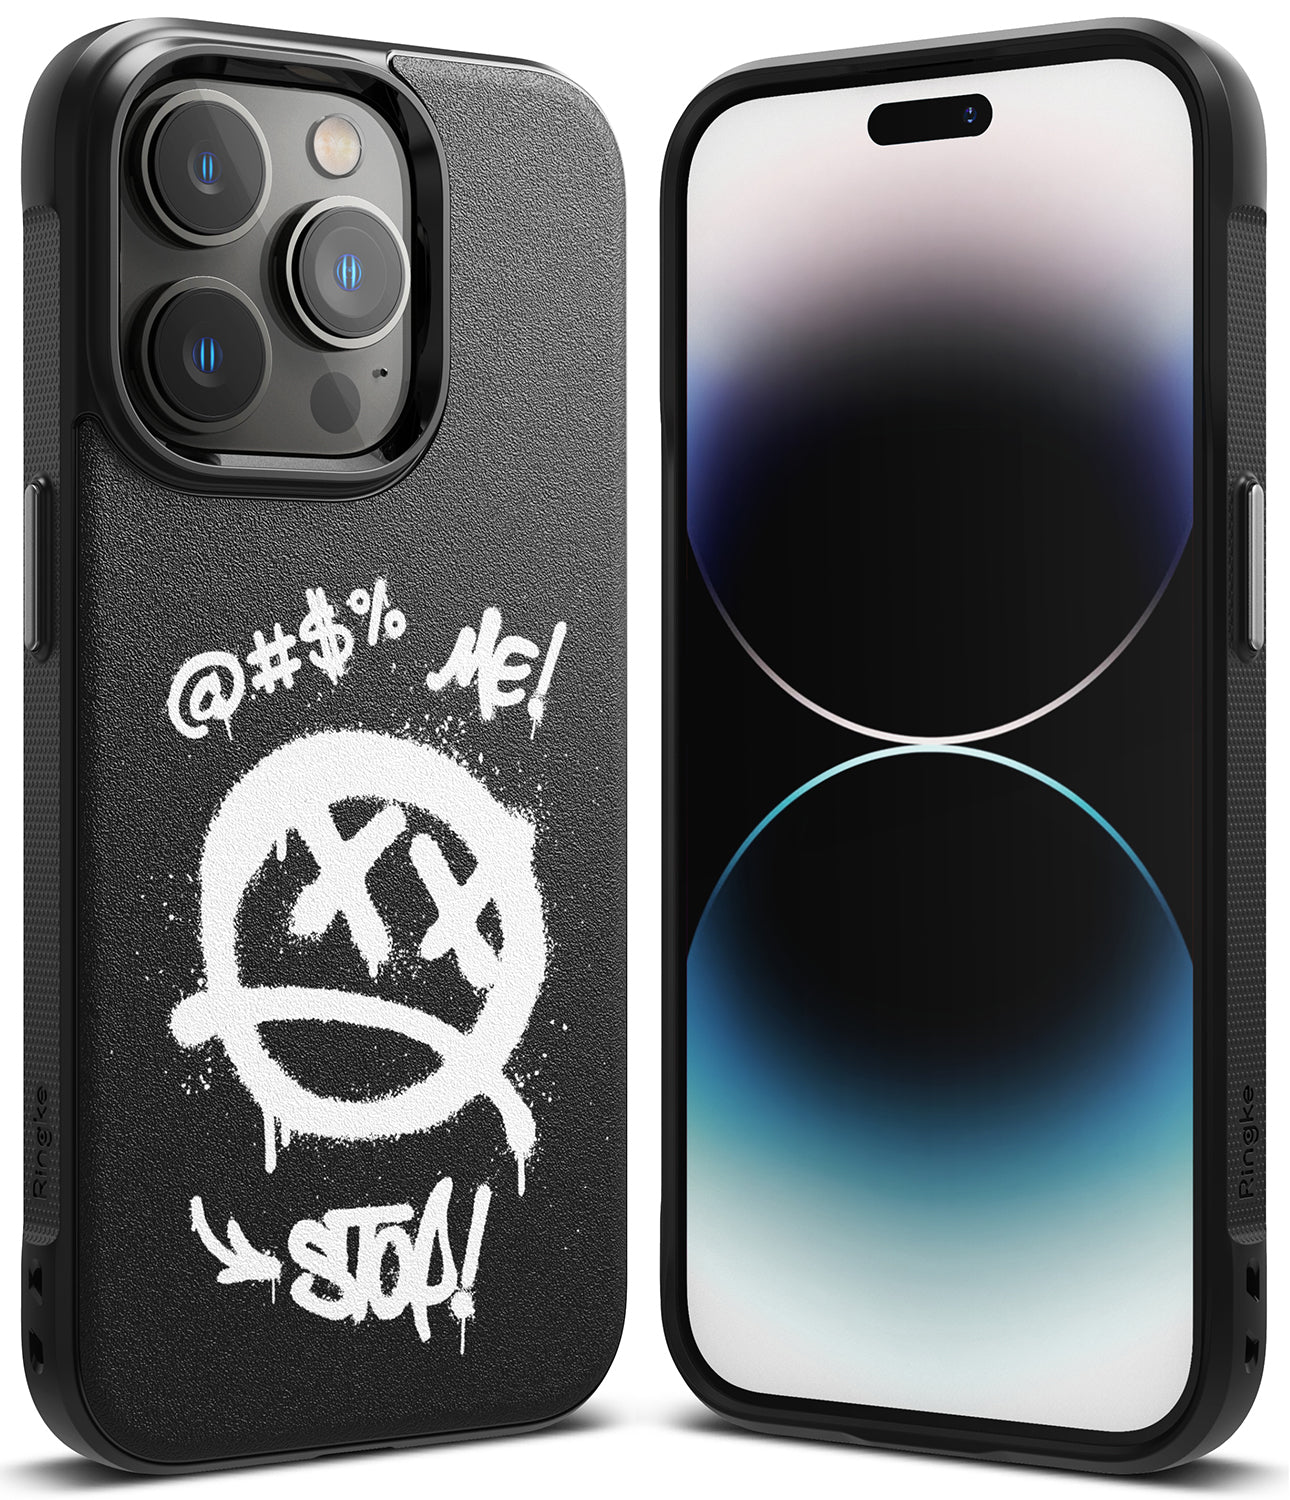 iPhone Pro Case Ringke Onyx Design Ringke Official Store